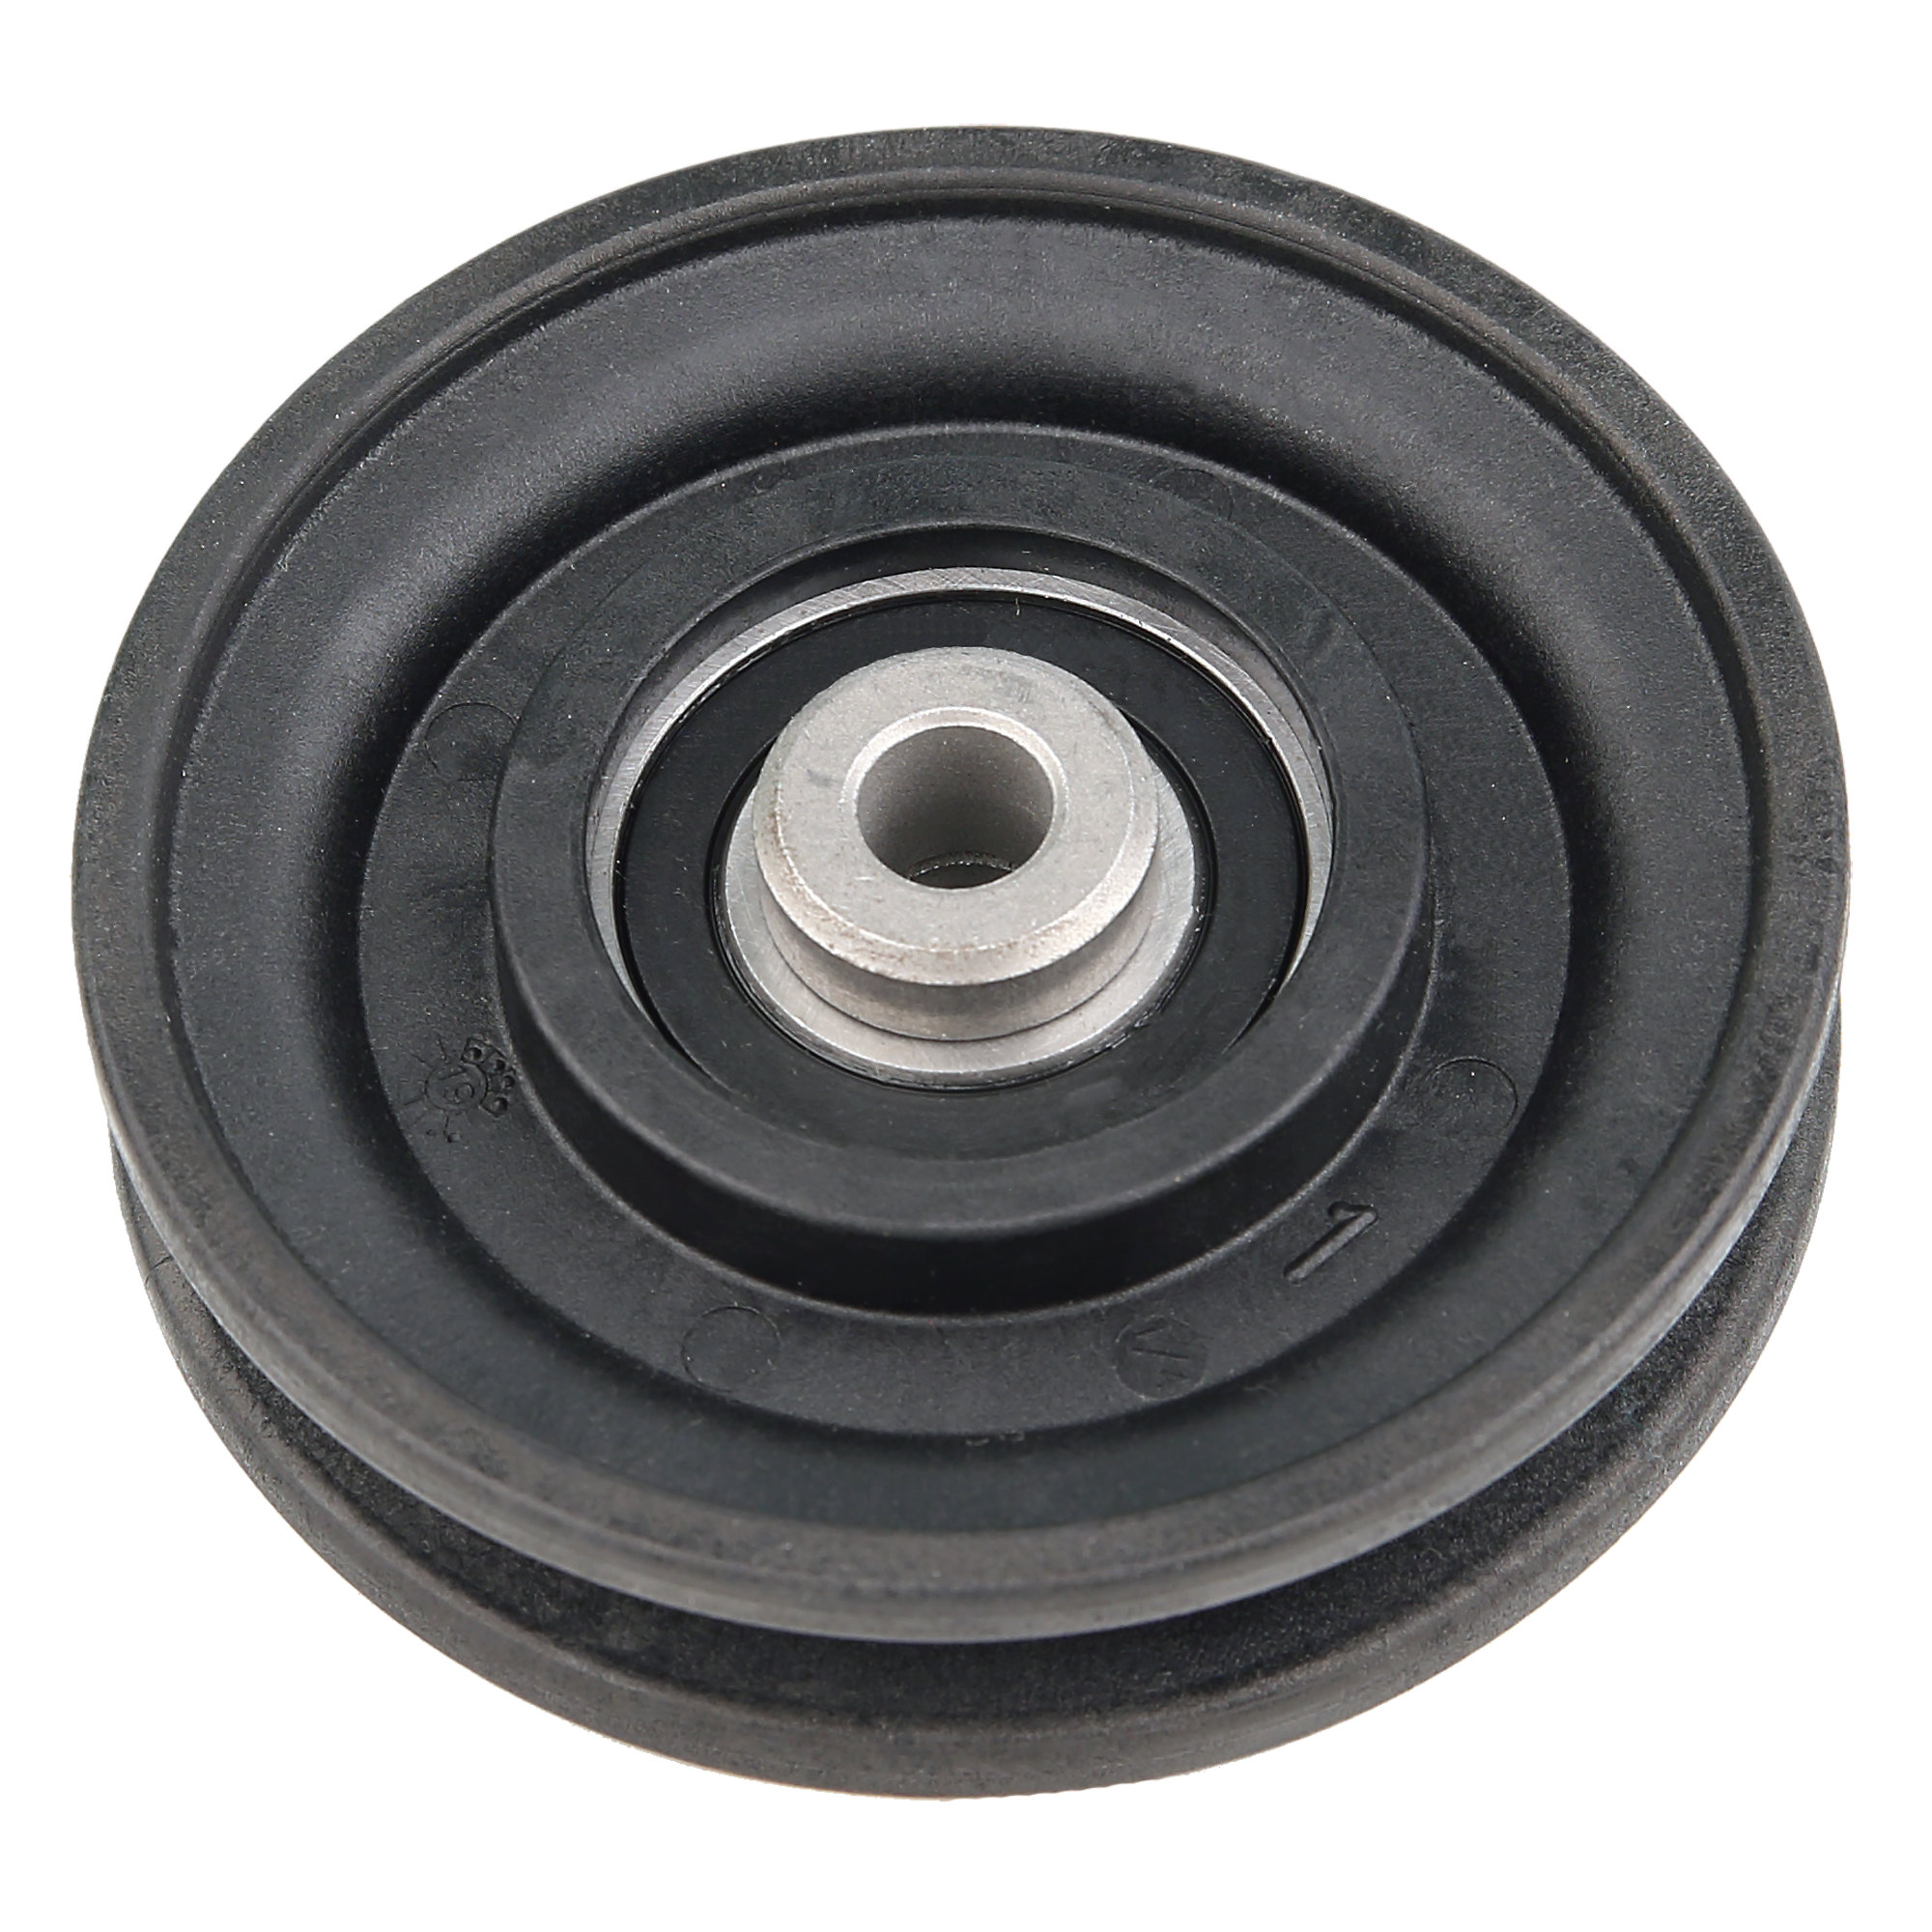 Pulley Assembly 3.5" Diameter with 3/8" Hole